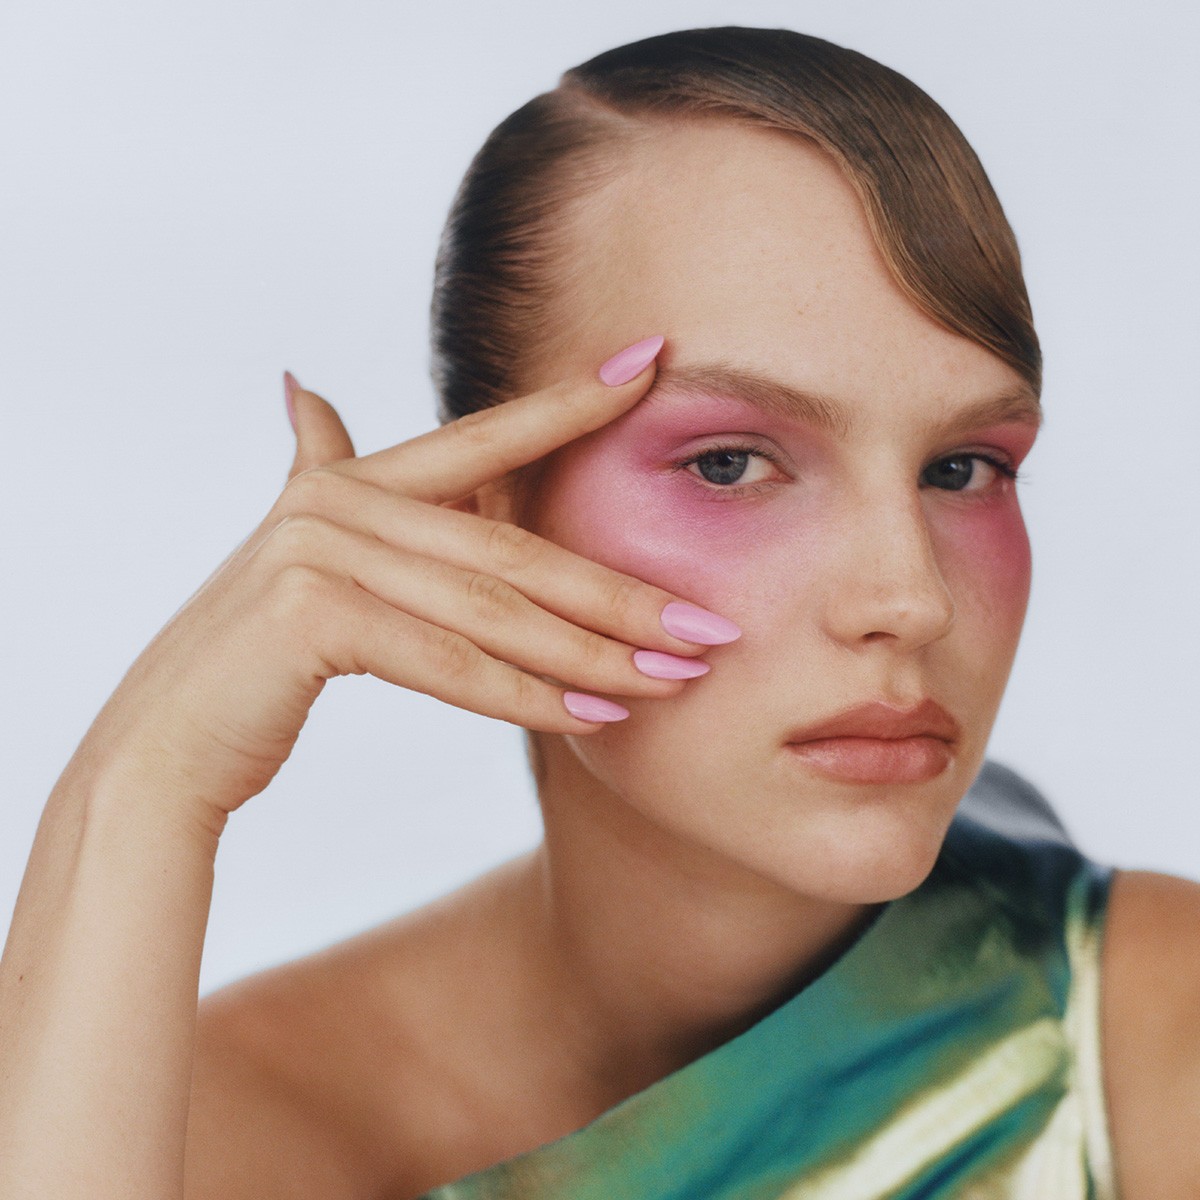 Top 5 makeup trends for the first half of 2023.